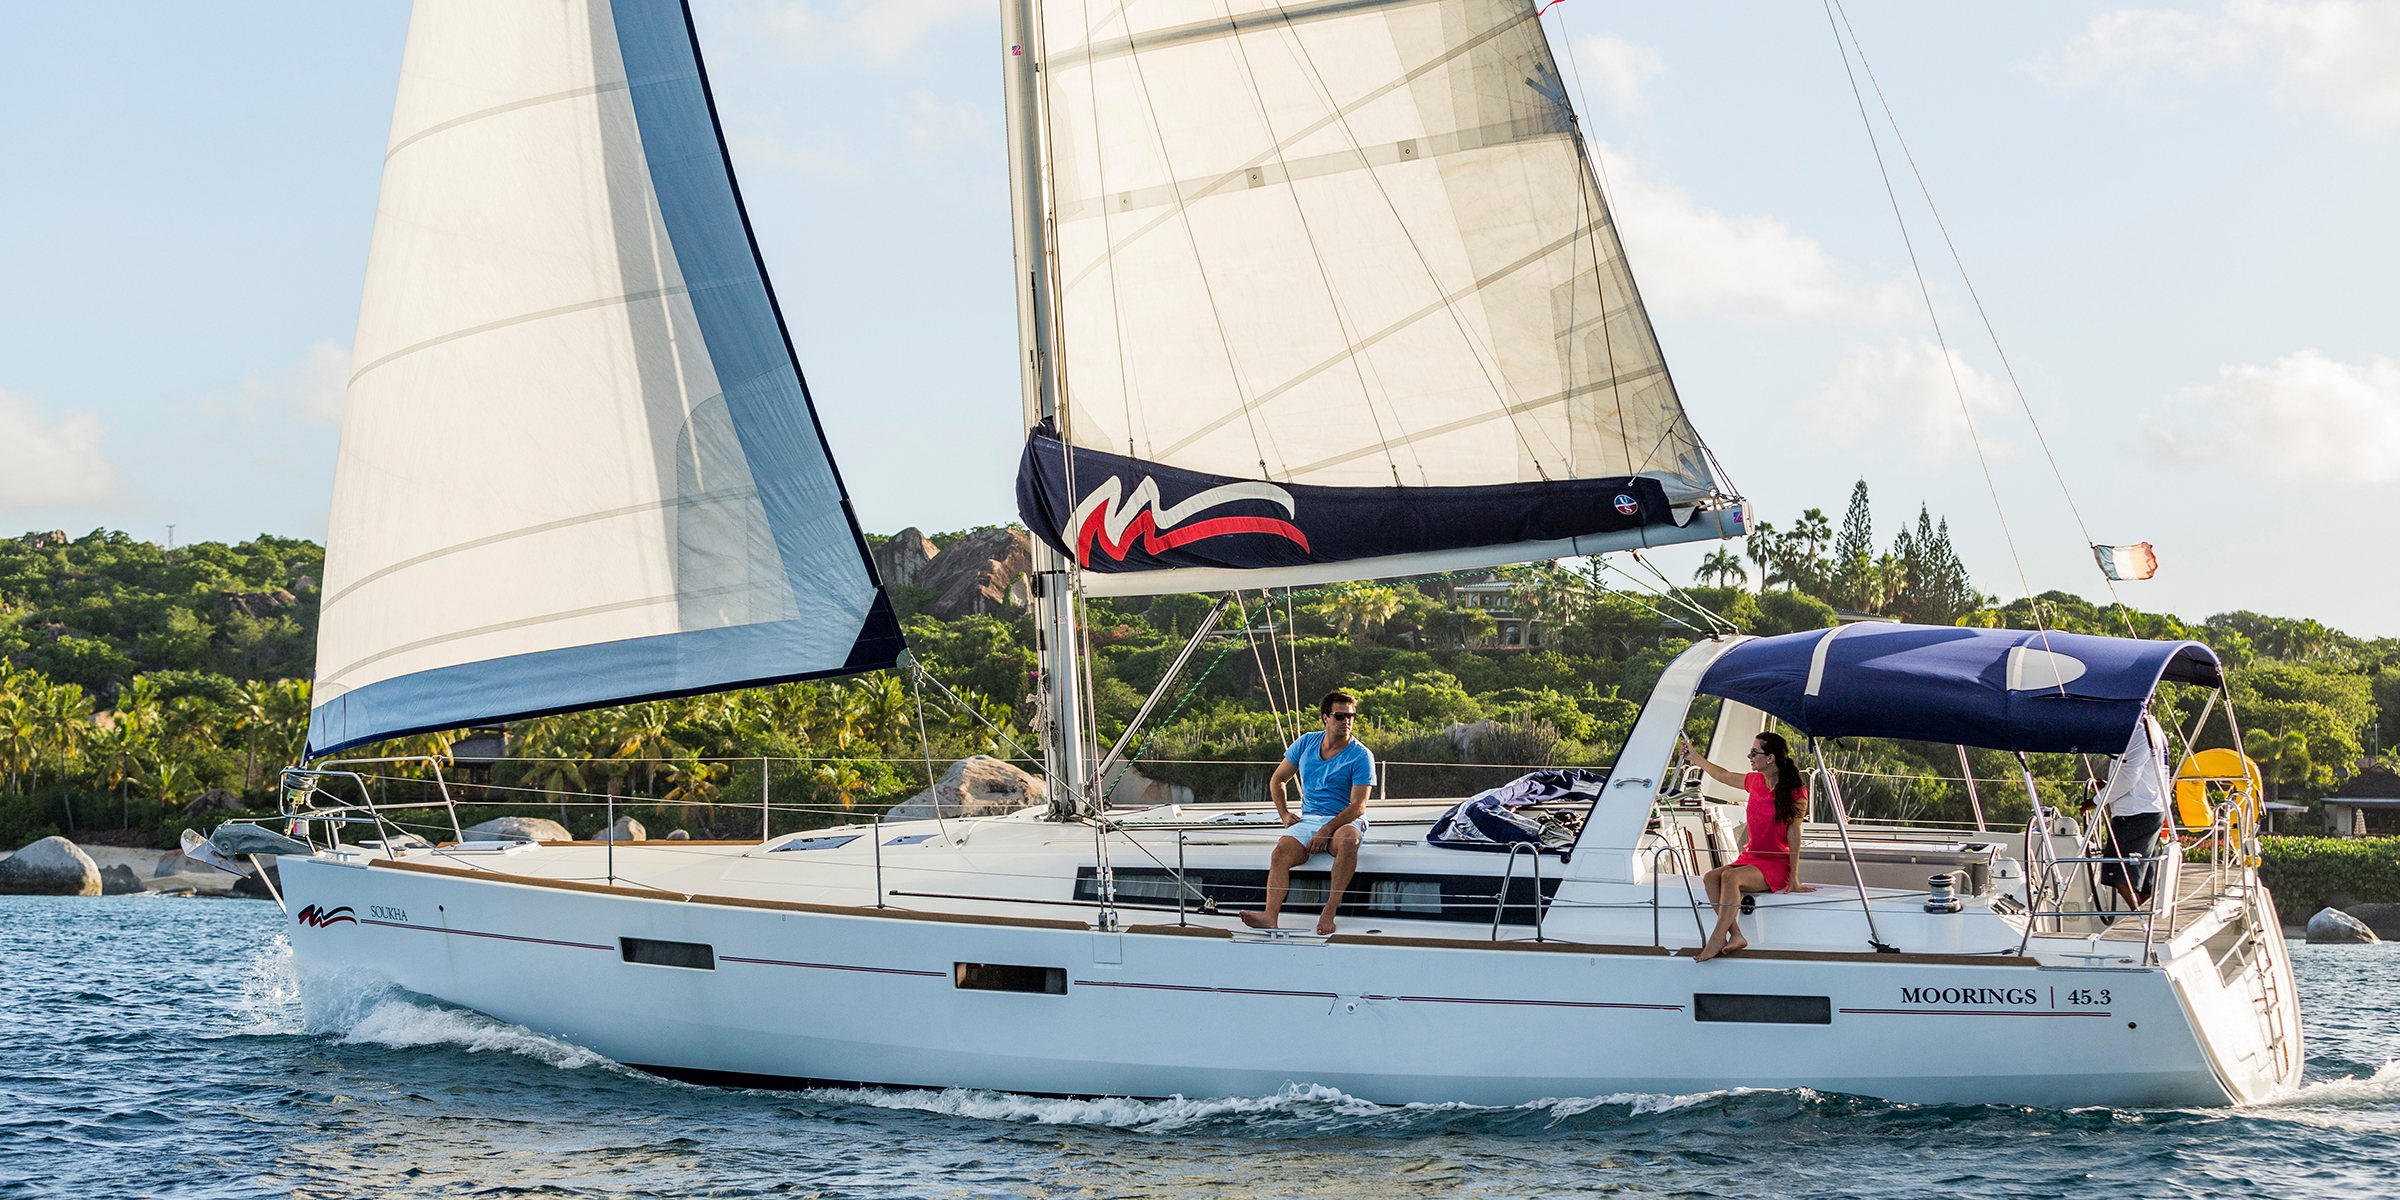 Oceanis 45 - Sailboat Charter Saint Lucia & Boat hire in St. Lucia Gros Islet Rodney Bay Marina 2